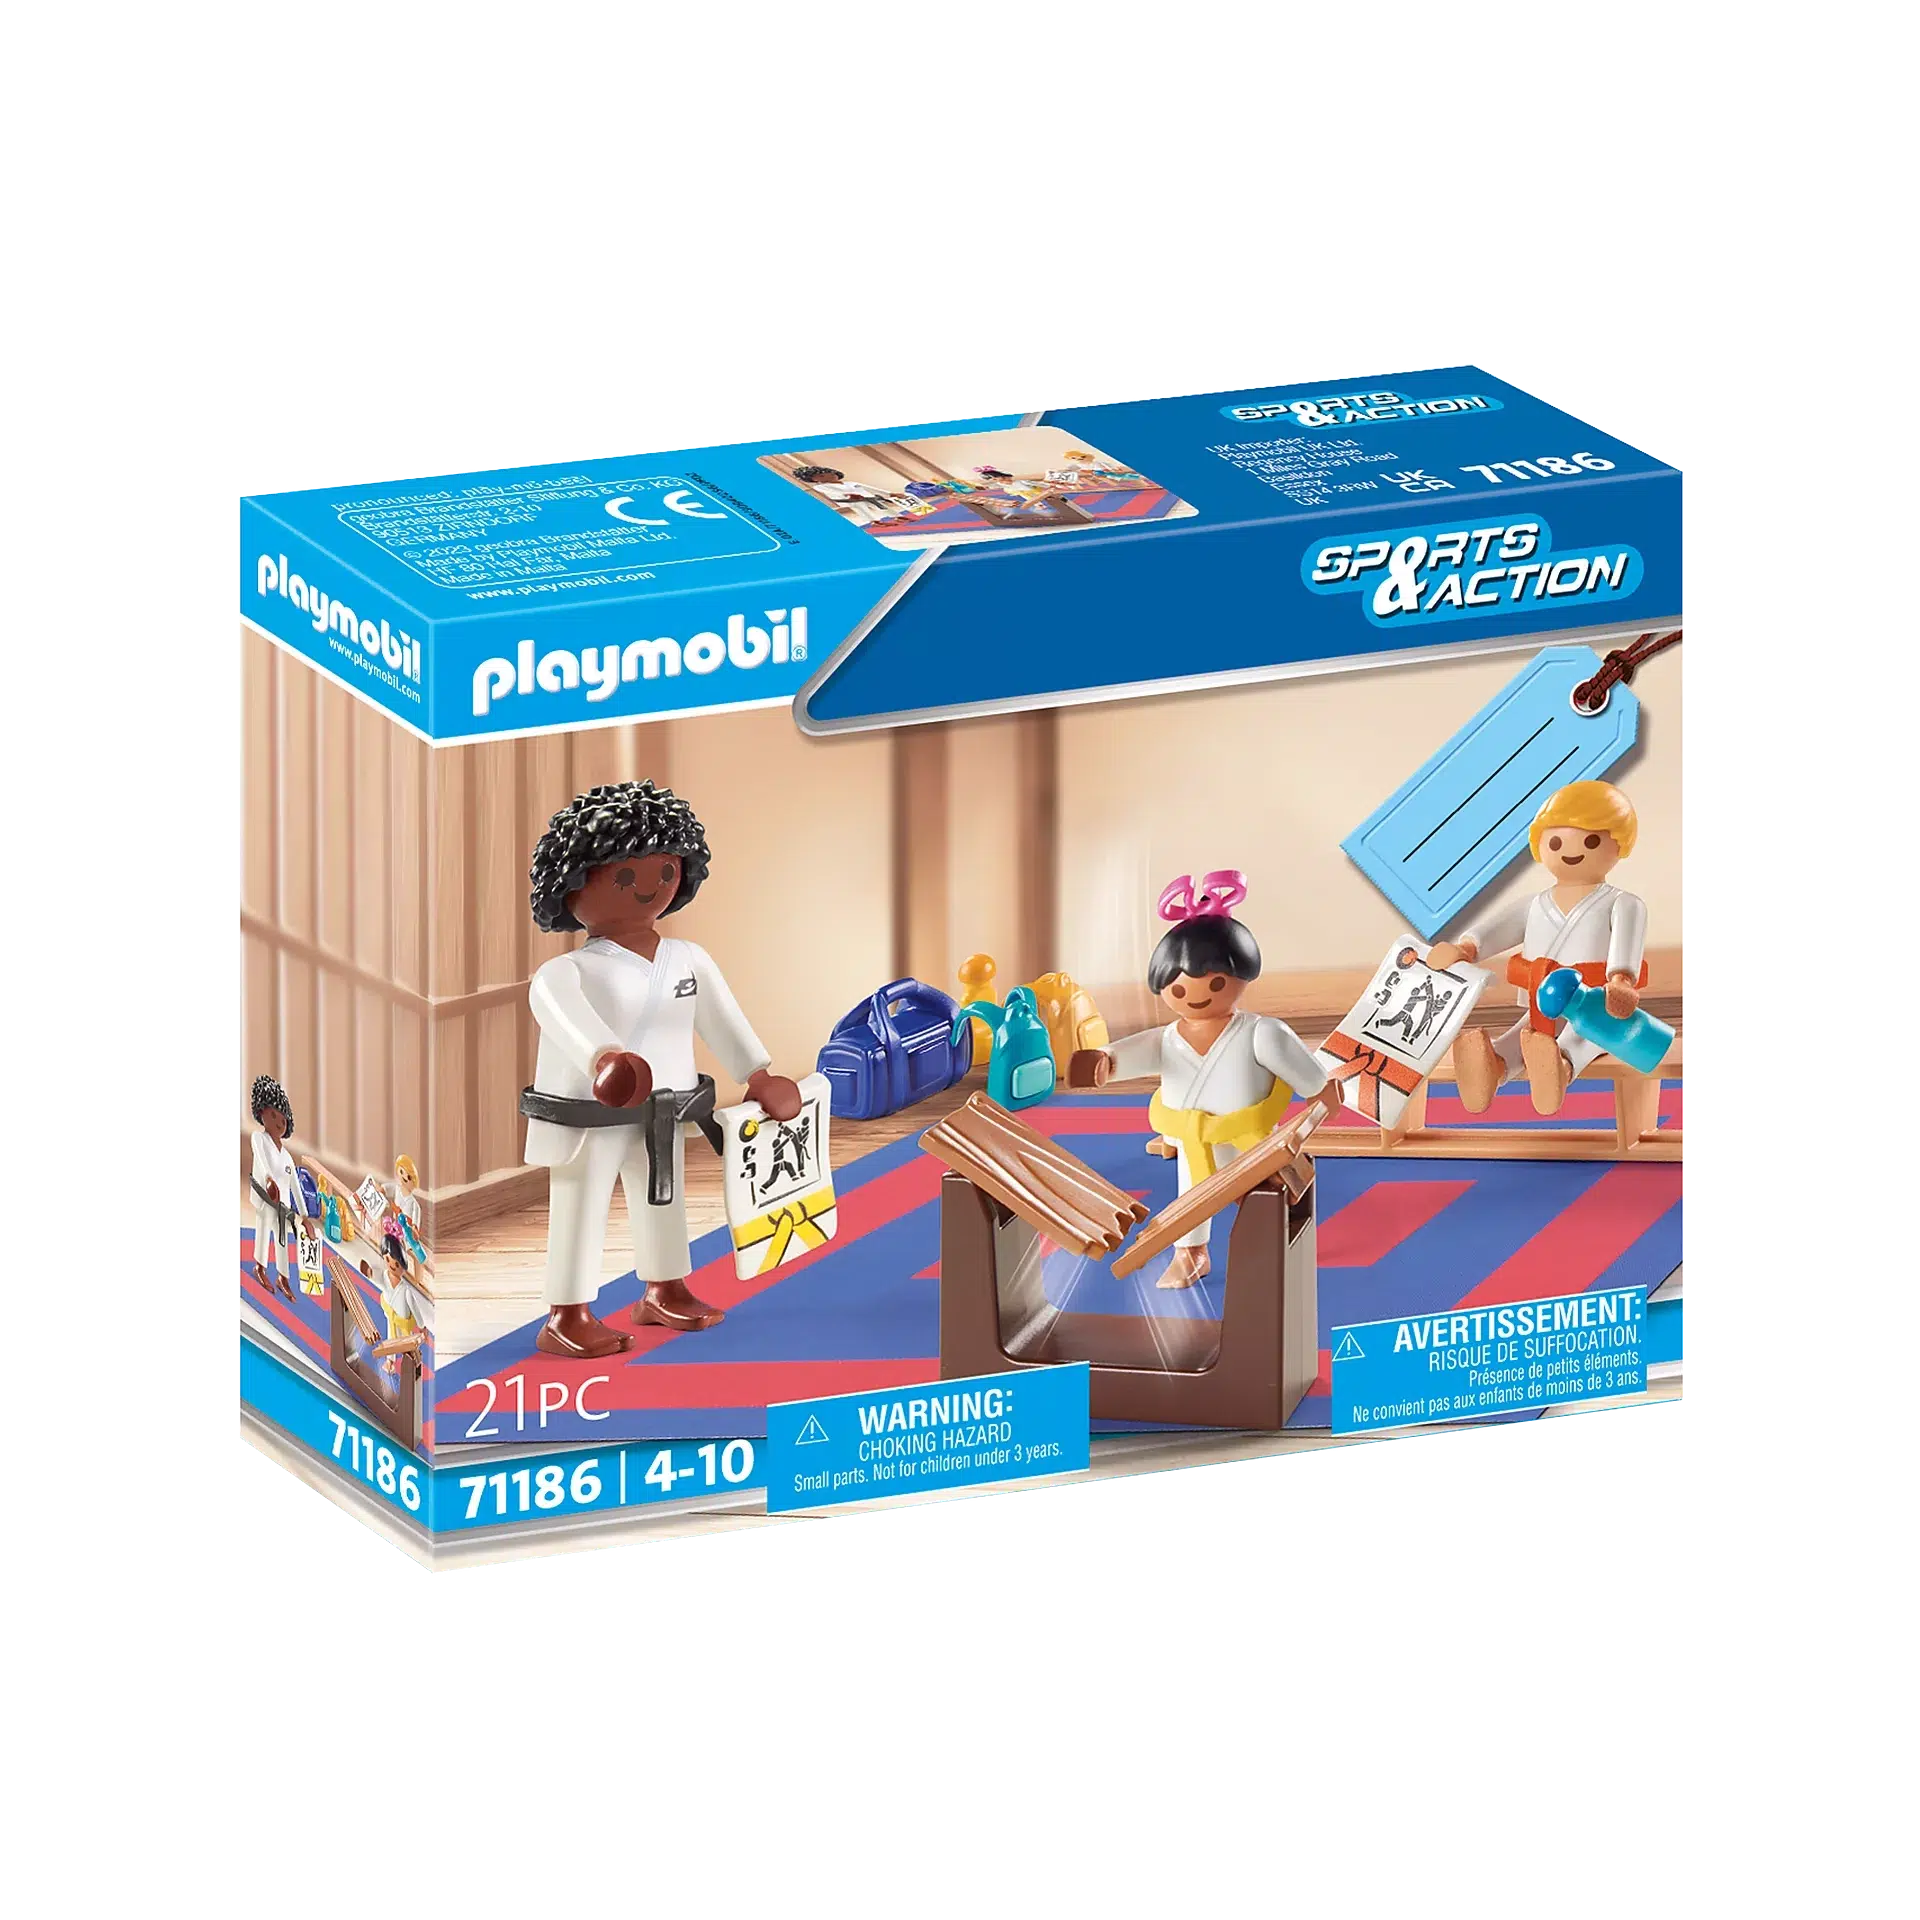 Playmobil-Sports & Action - Karate Class Gift Set-71186-Legacy Toys